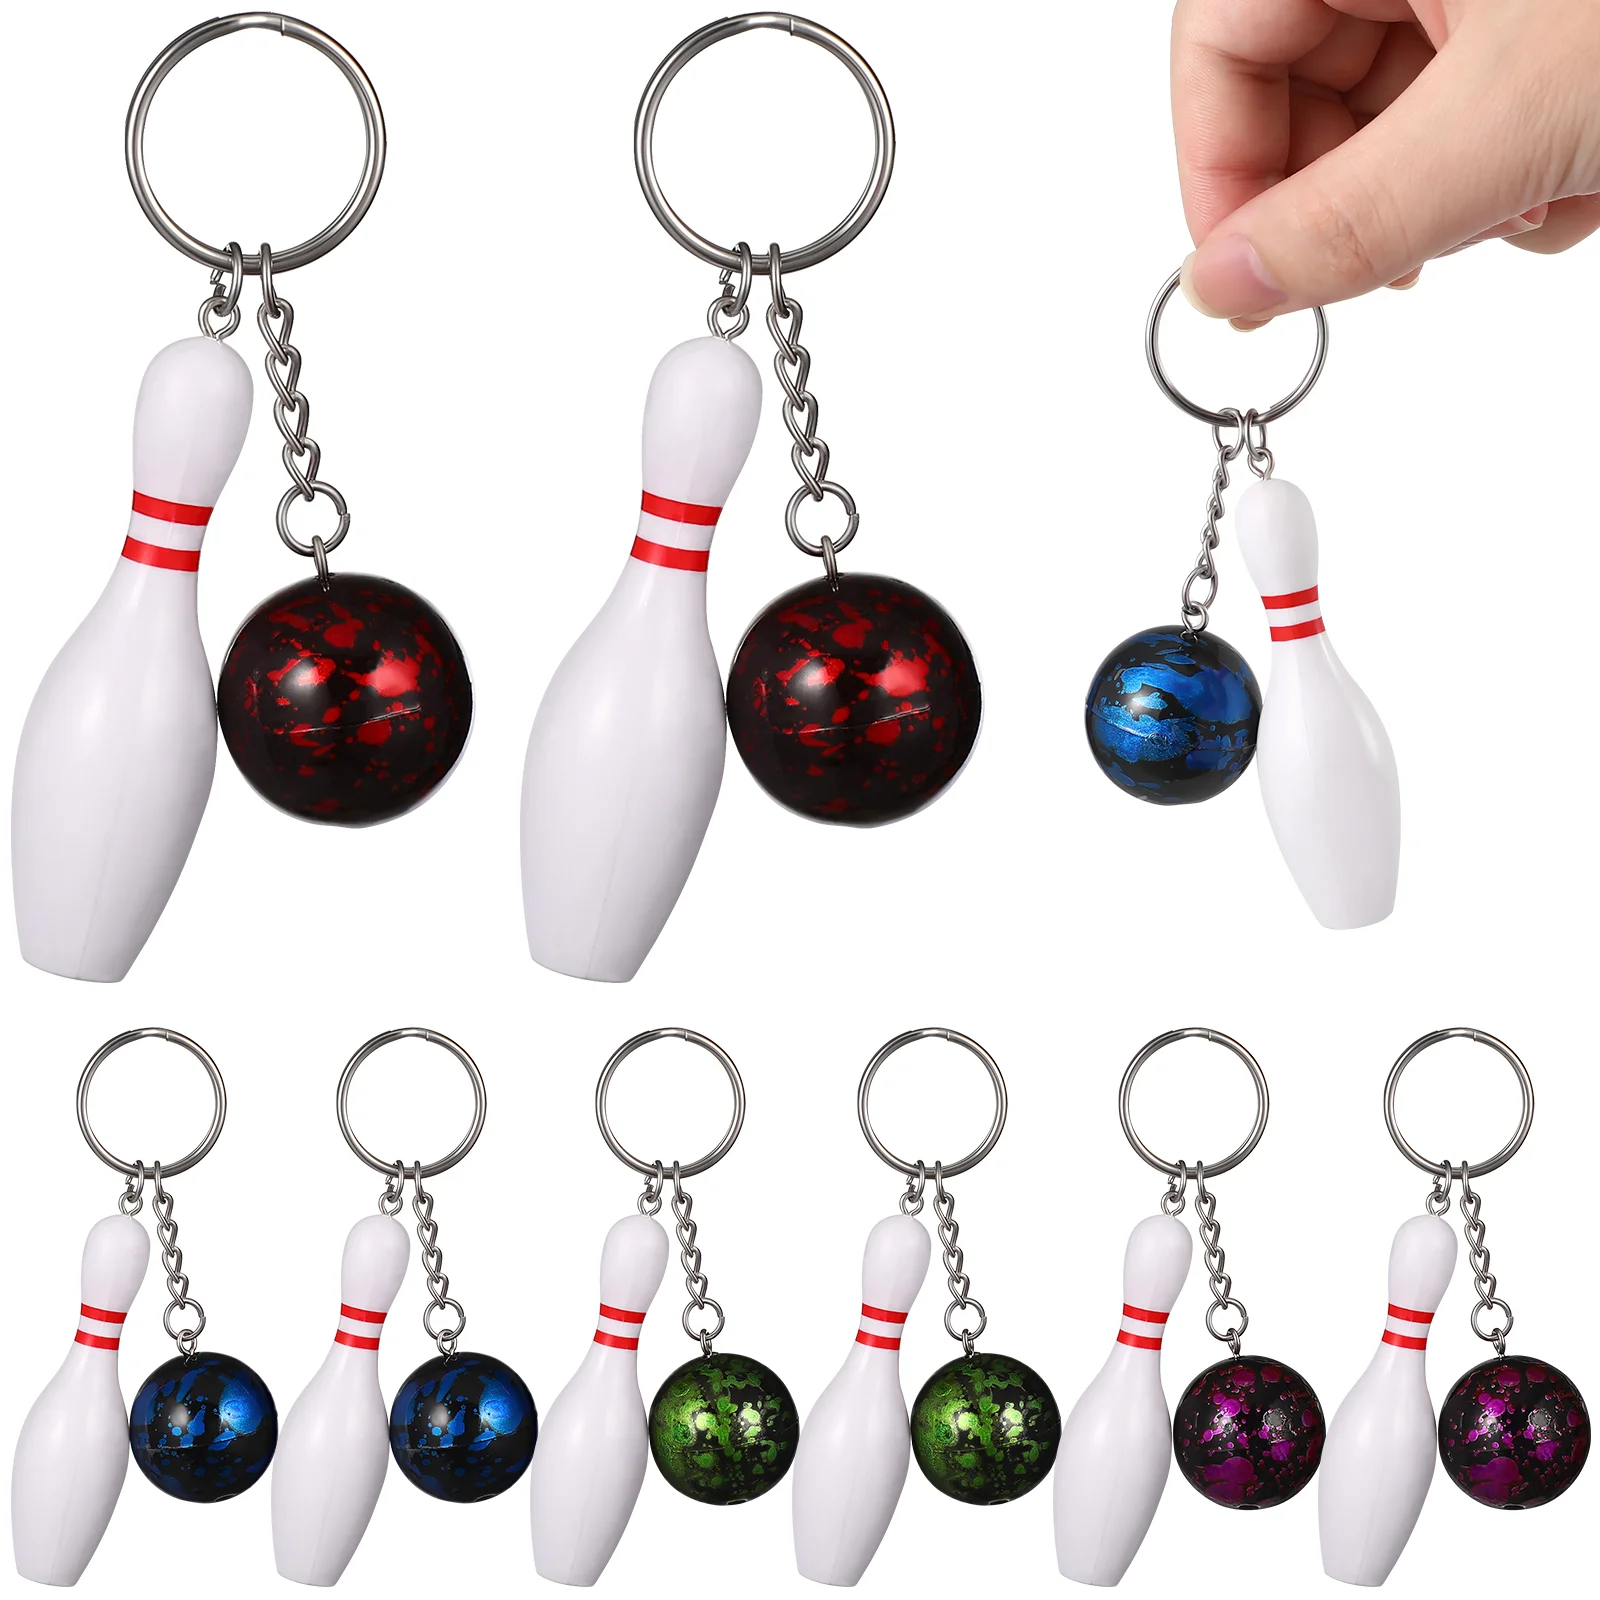 

10 Pcs Bowling Keychain Car Holder Keychains Keys Pendant Rings Accessories Stainless Steel Ball Pin Charm Man